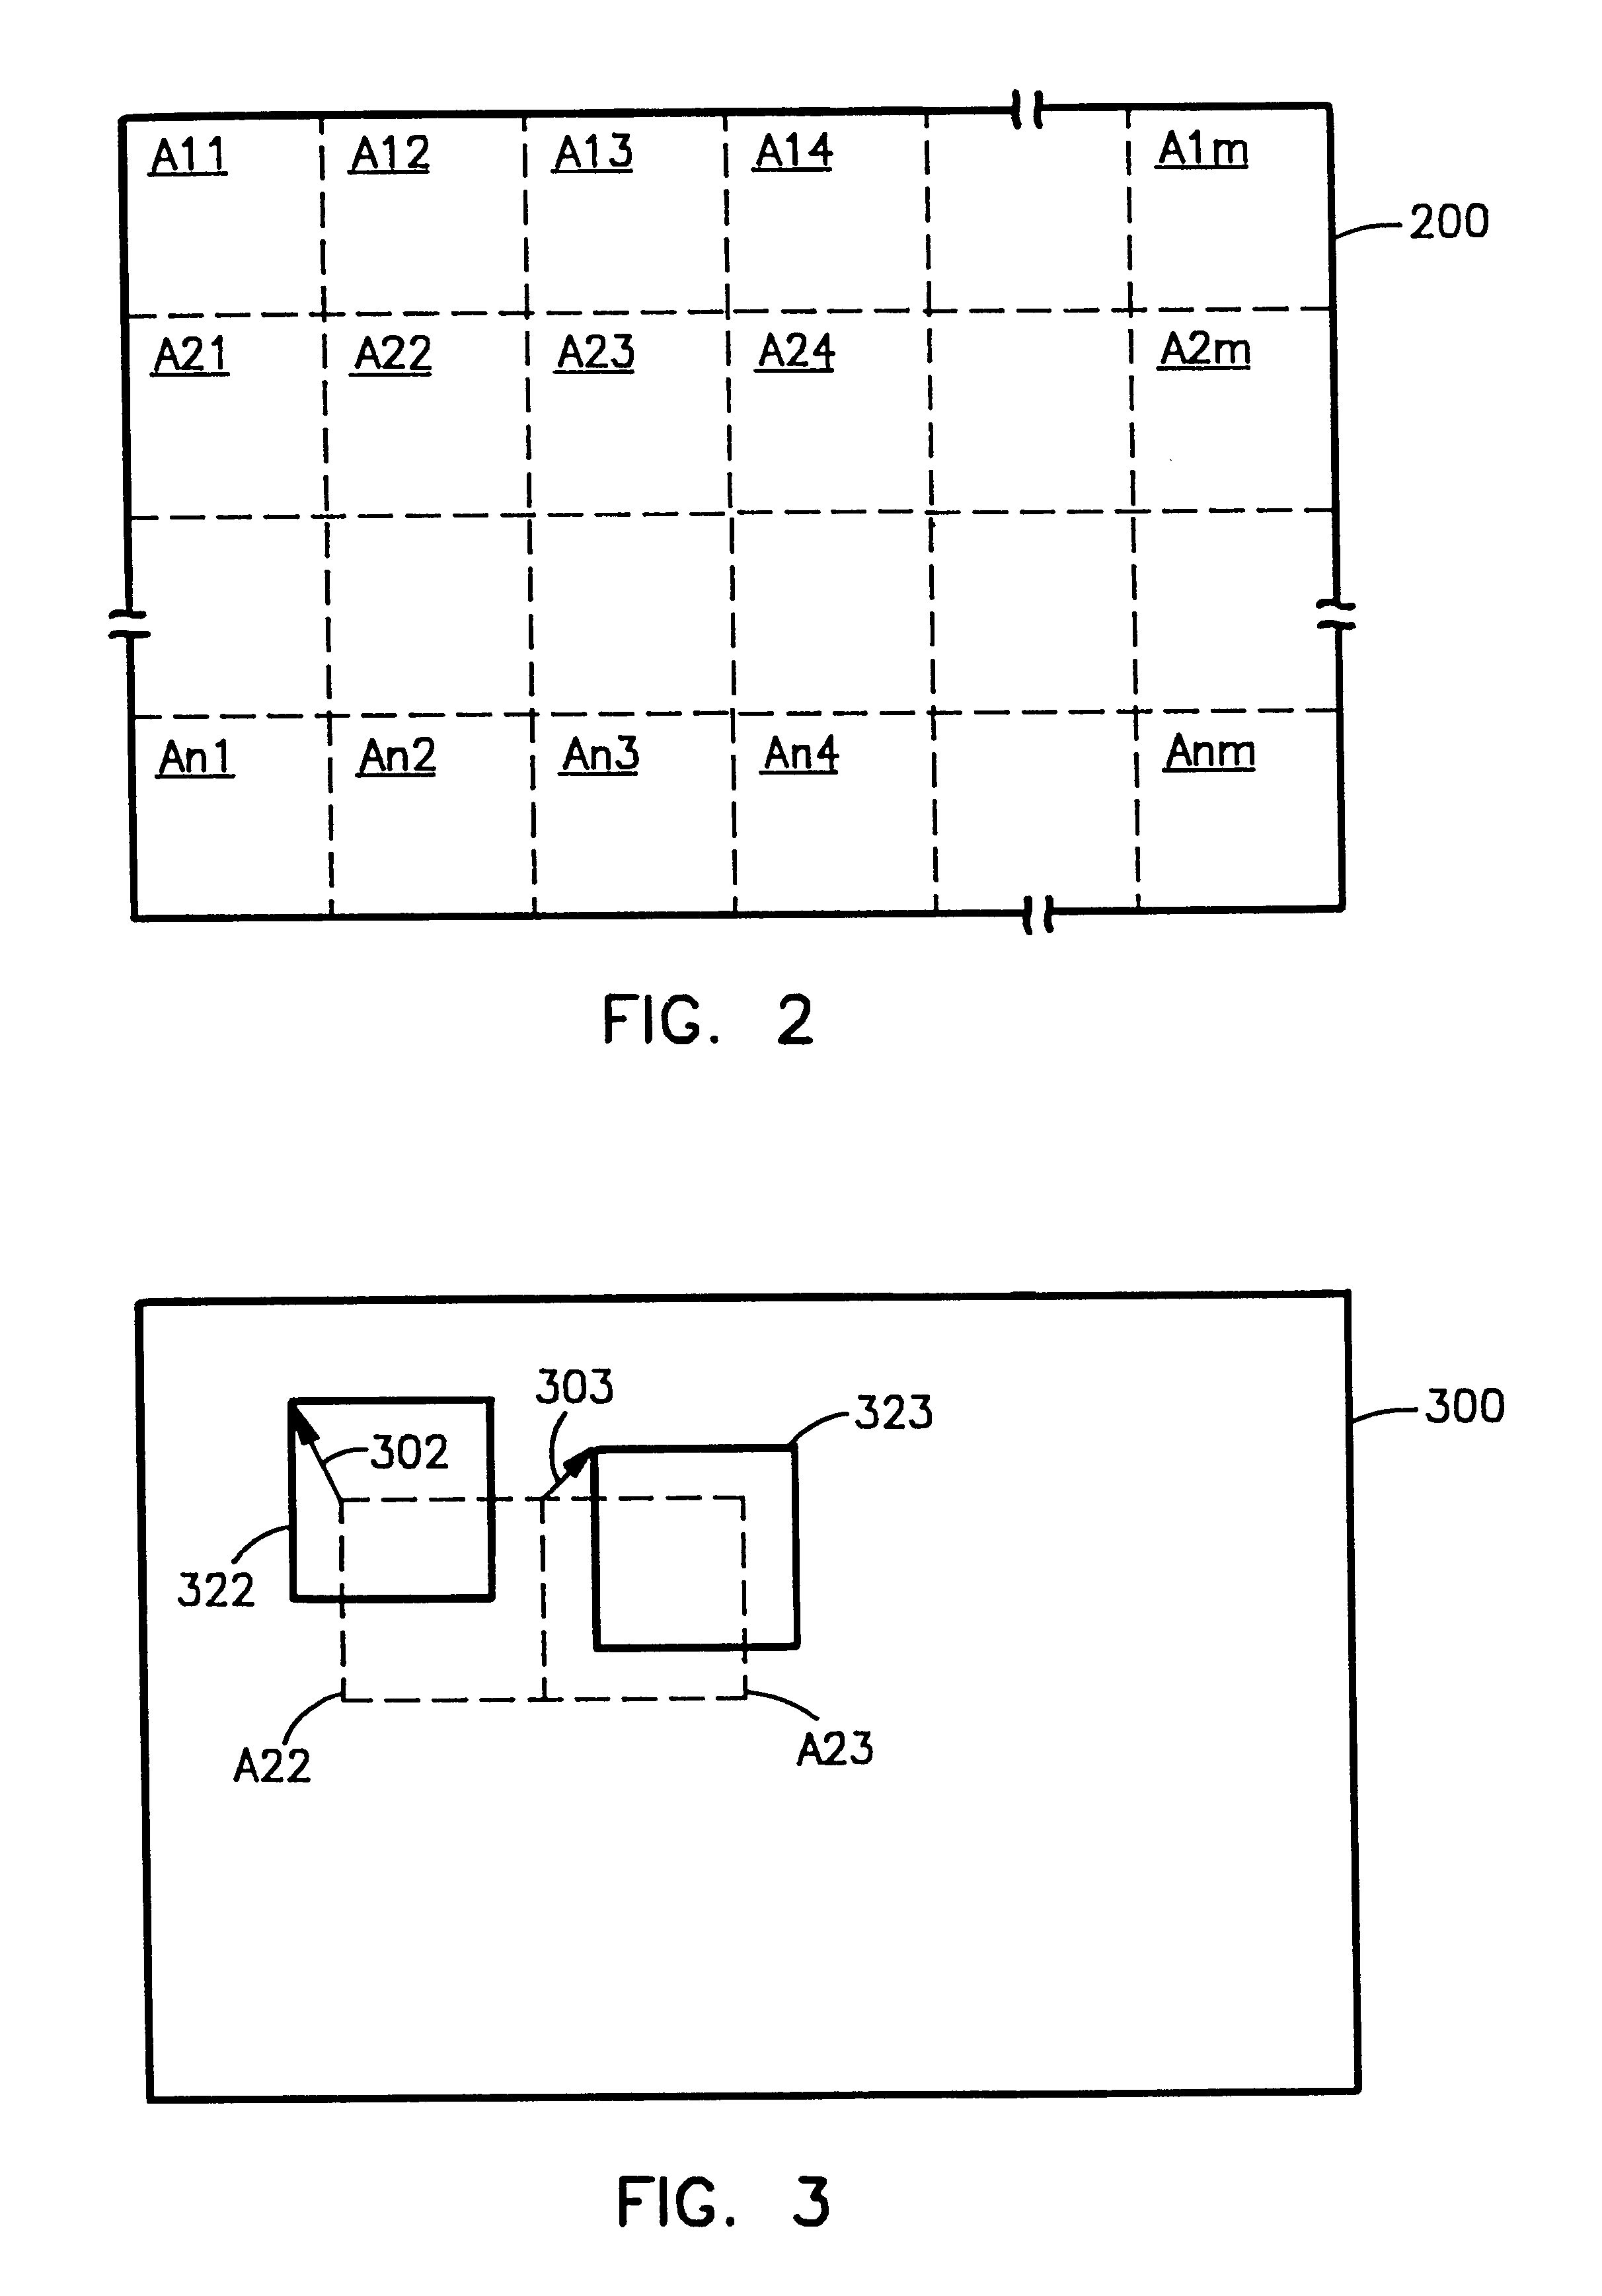 Motion vector based frame insertion process for increasing the frame rate of moving images